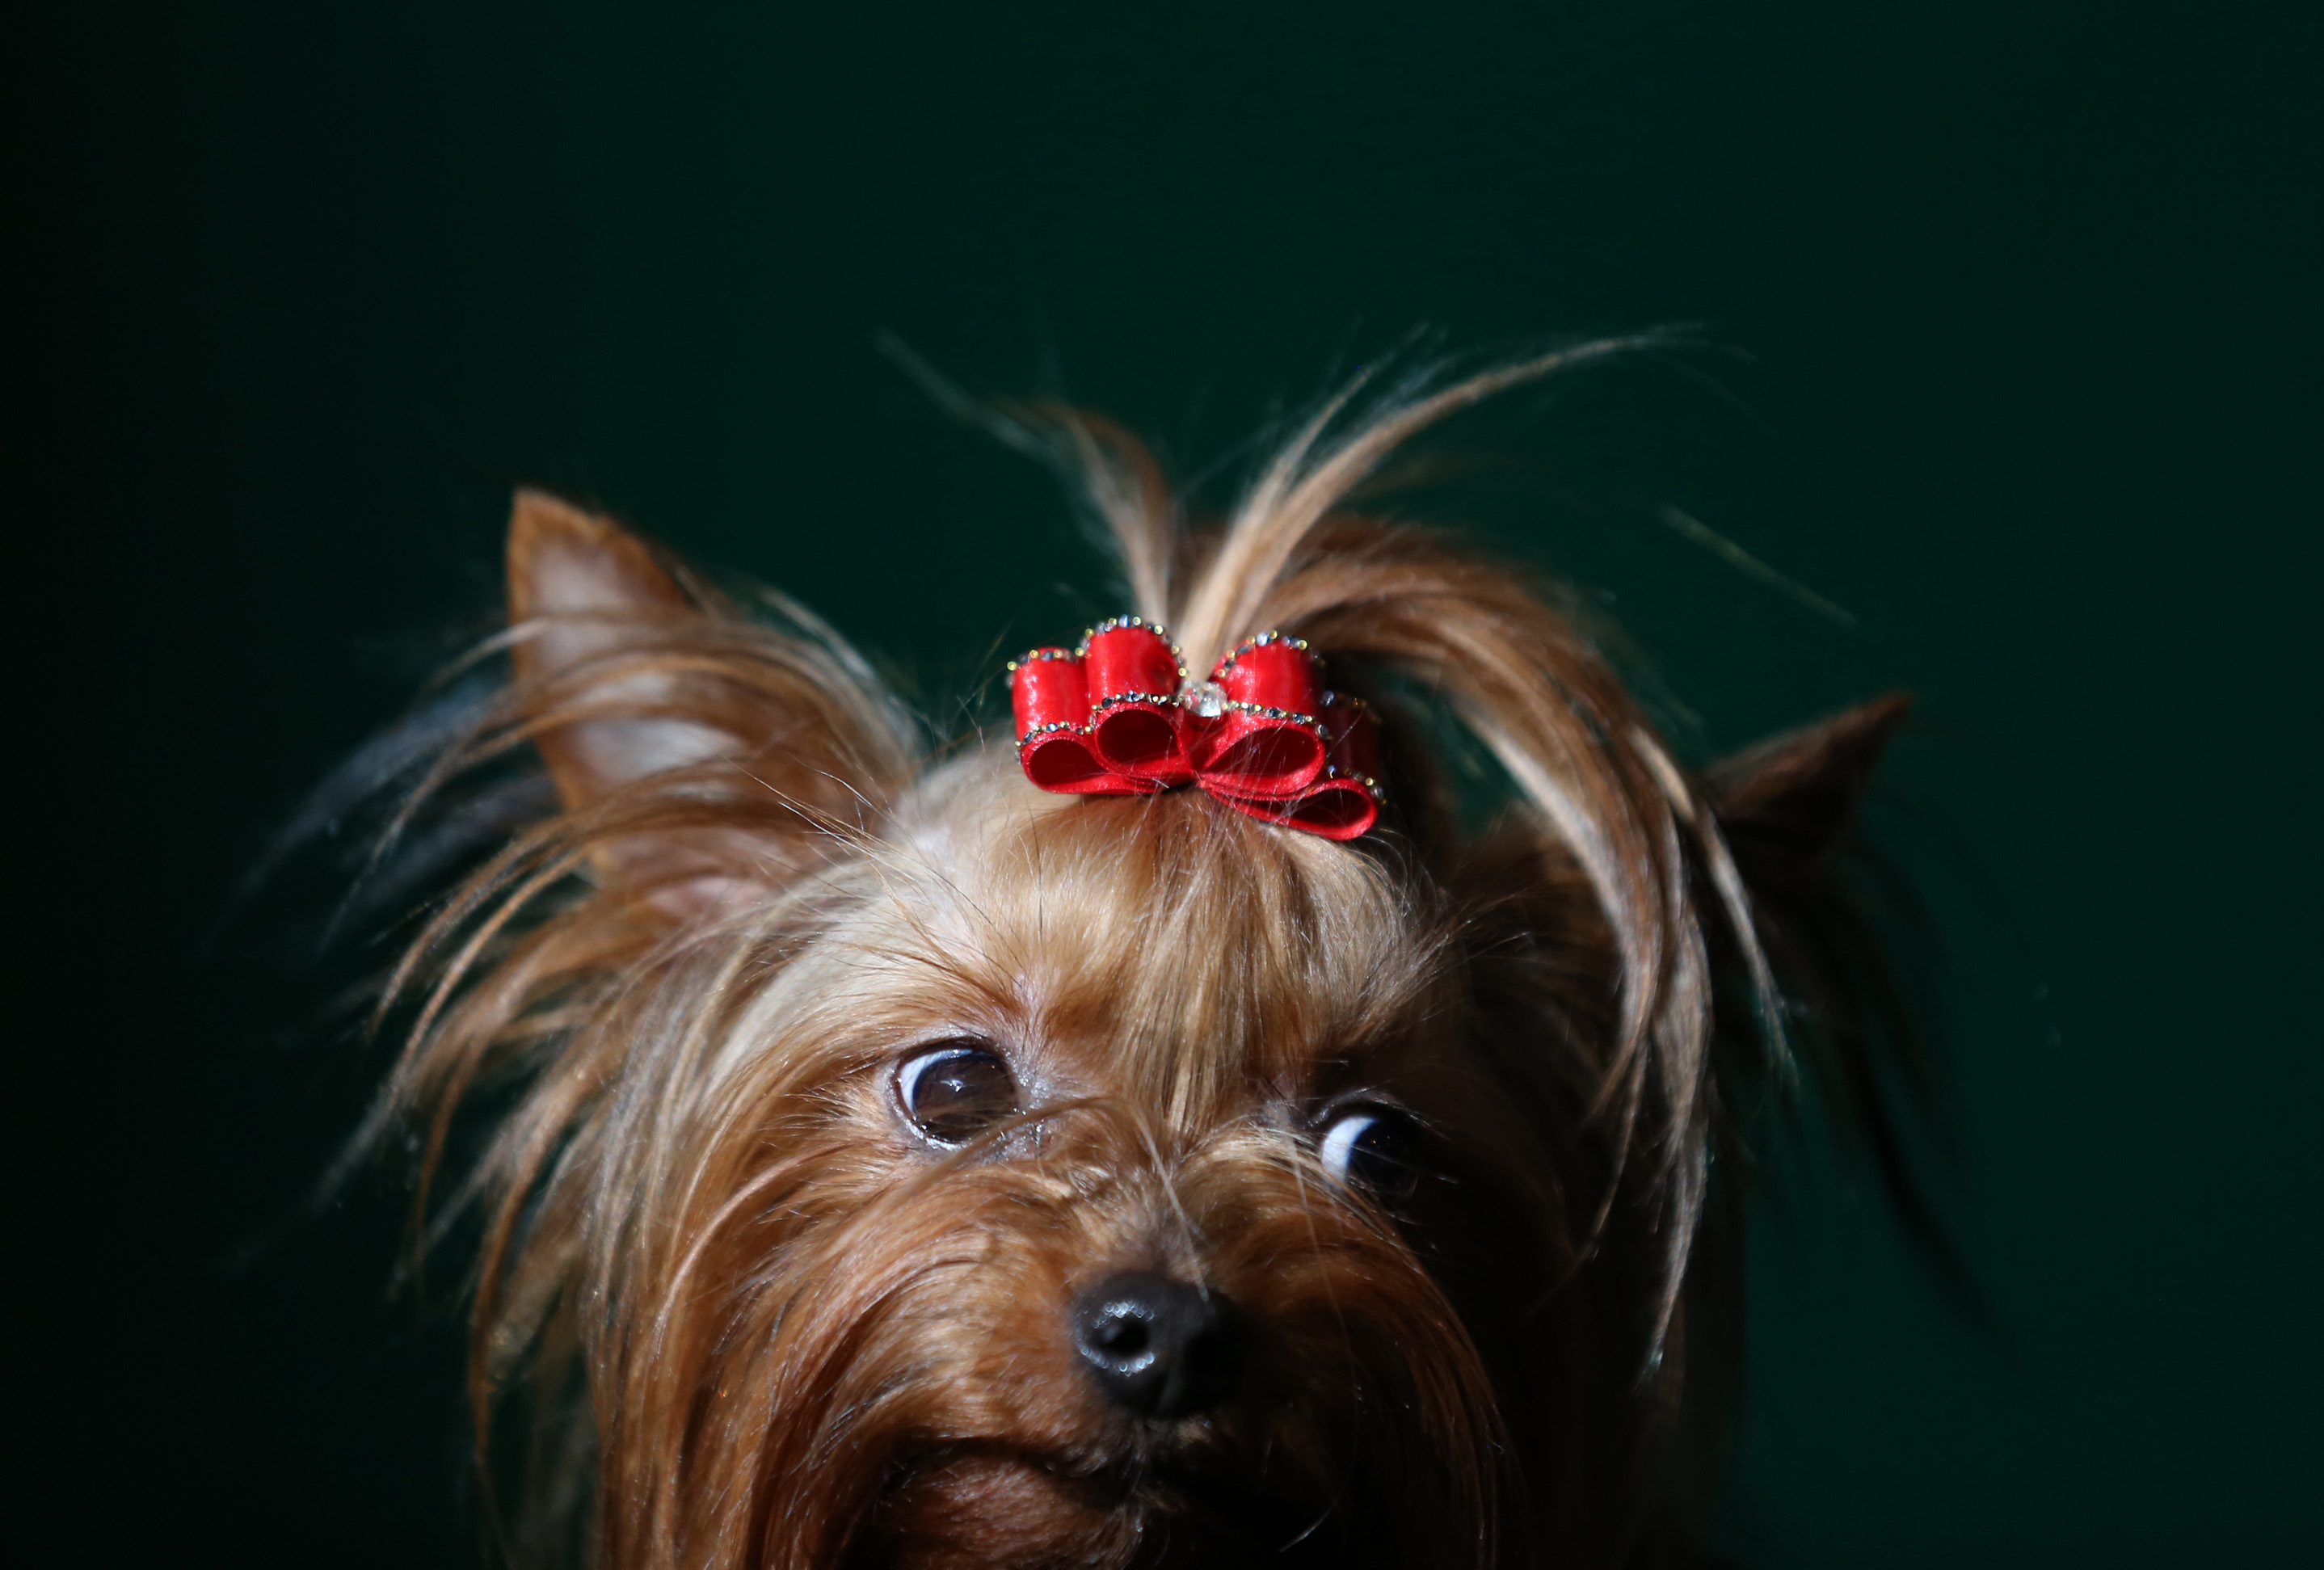 BIRMINGHAM, ENGLAND - MARCH 08:A Yorkshire Terrier waits to be judged during the Toy and Utility day of the Crufts dog show at the NEC on March 8, 2014 in Birmingham, England. Said to be the 